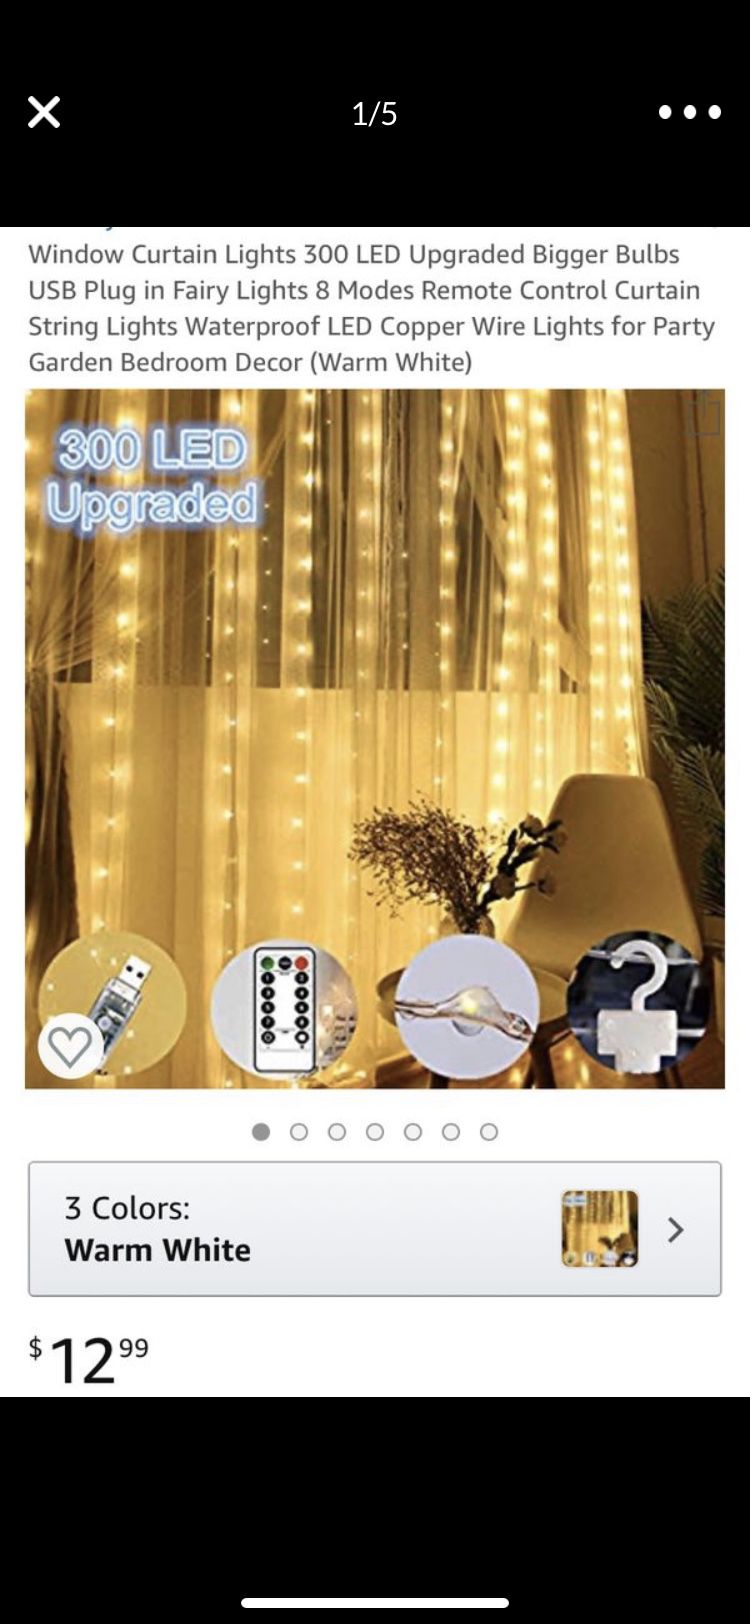 Brand new usb 300 led curtain lights with remote